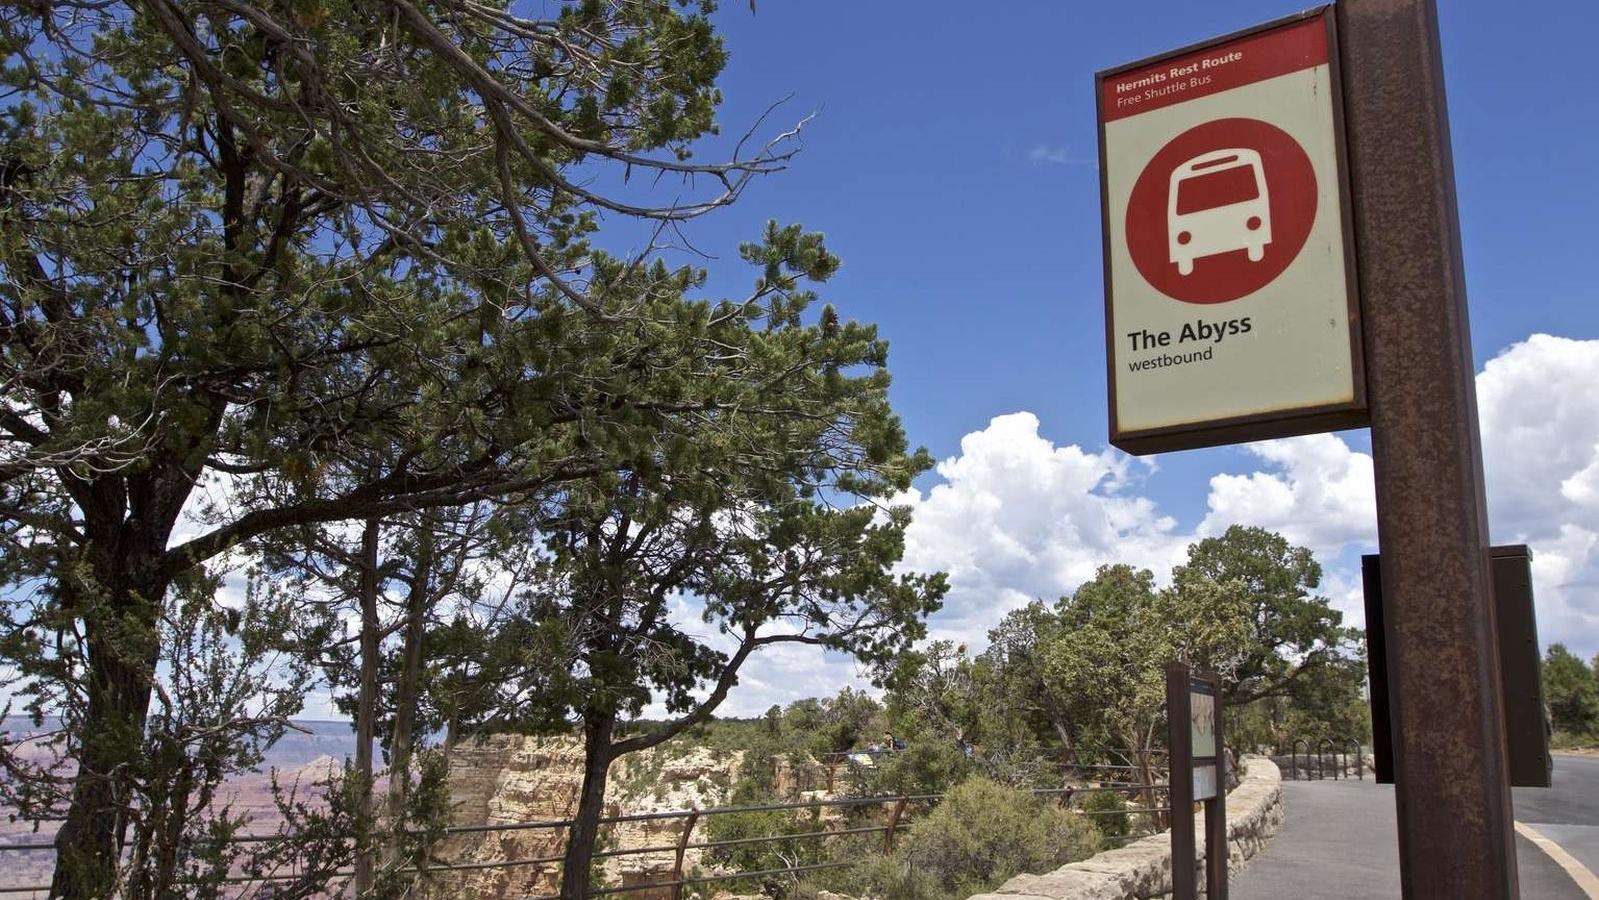 A low rock wall separates a bus stop, marked by a red and white sign, from the rim of Grand Canyon.